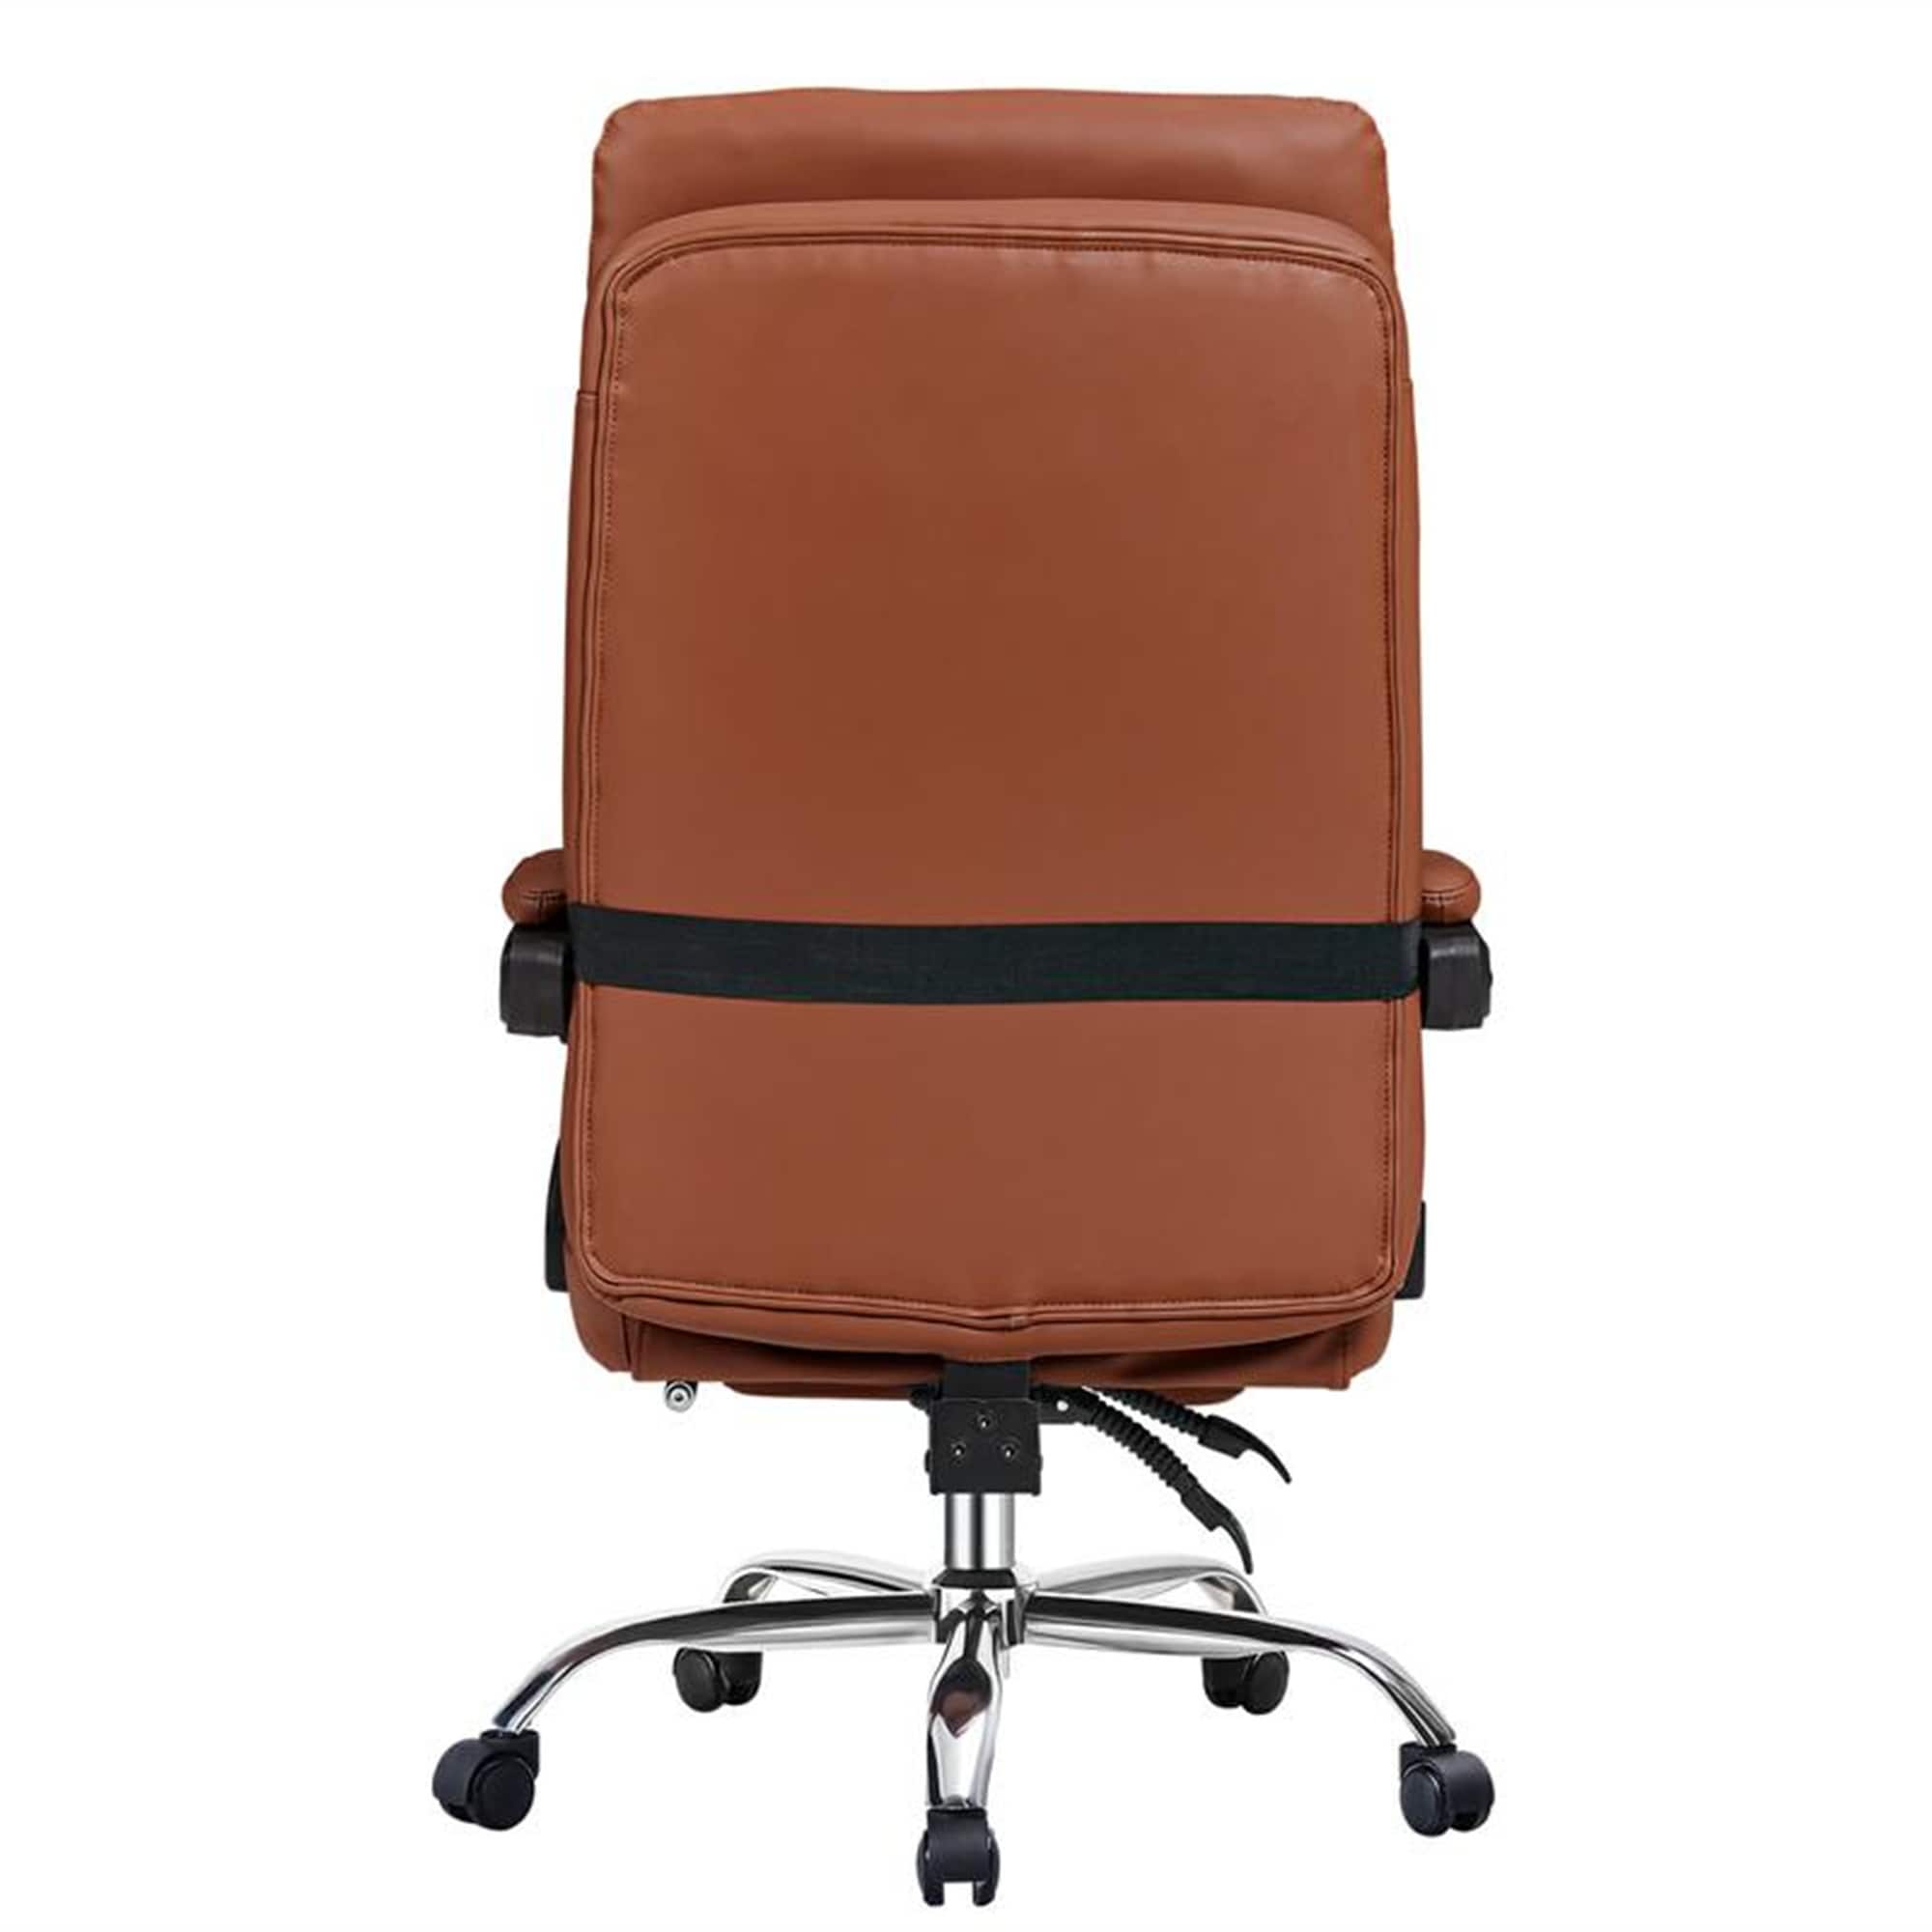 https://ak1.ostkcdn.com/images/products/is/images/direct/e449fcd6a2a444dade71bad203626dfc7a22a7b3/Executive-Chair%2C-High-Back-Leather-Desk-Chair-W--Retractable-Footrest.jpg